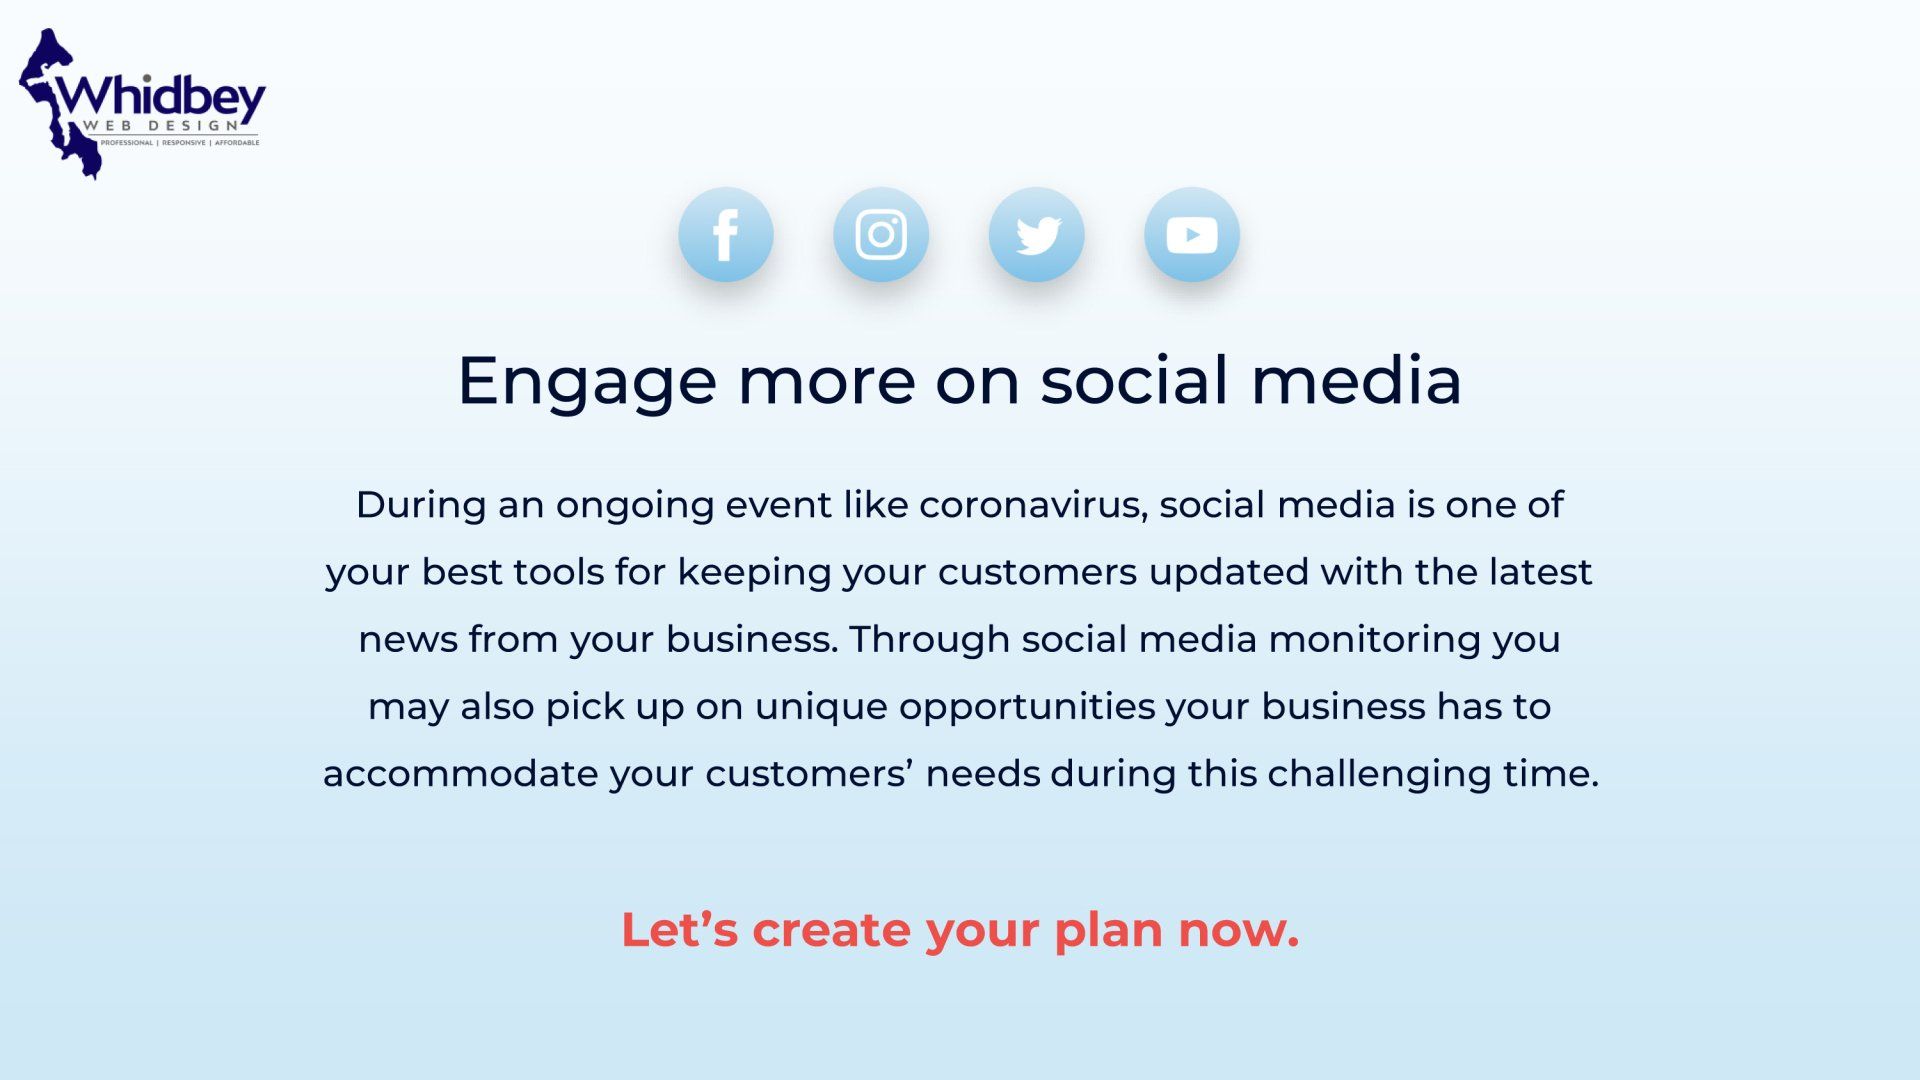 Engage more on social media